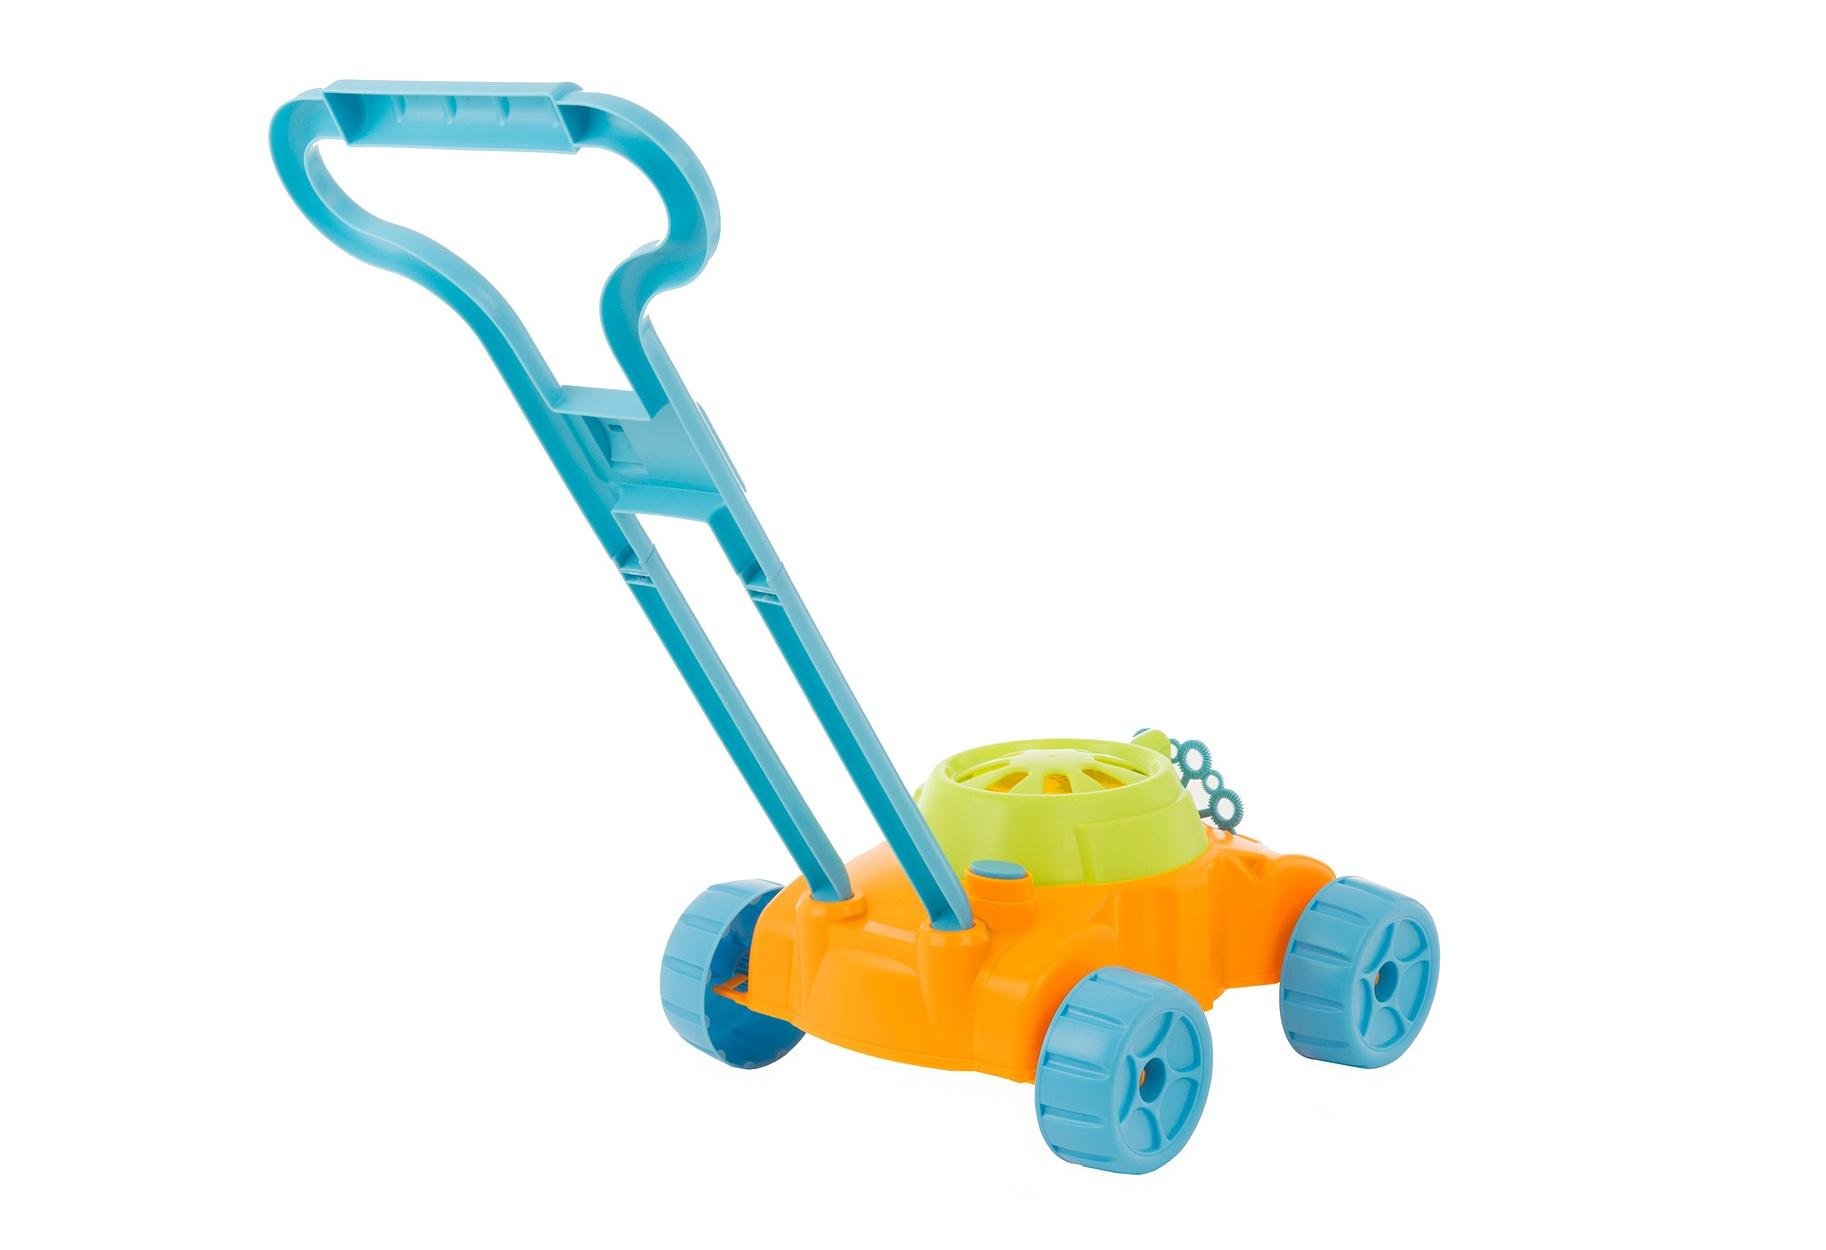 chad valley bubble lawn mower